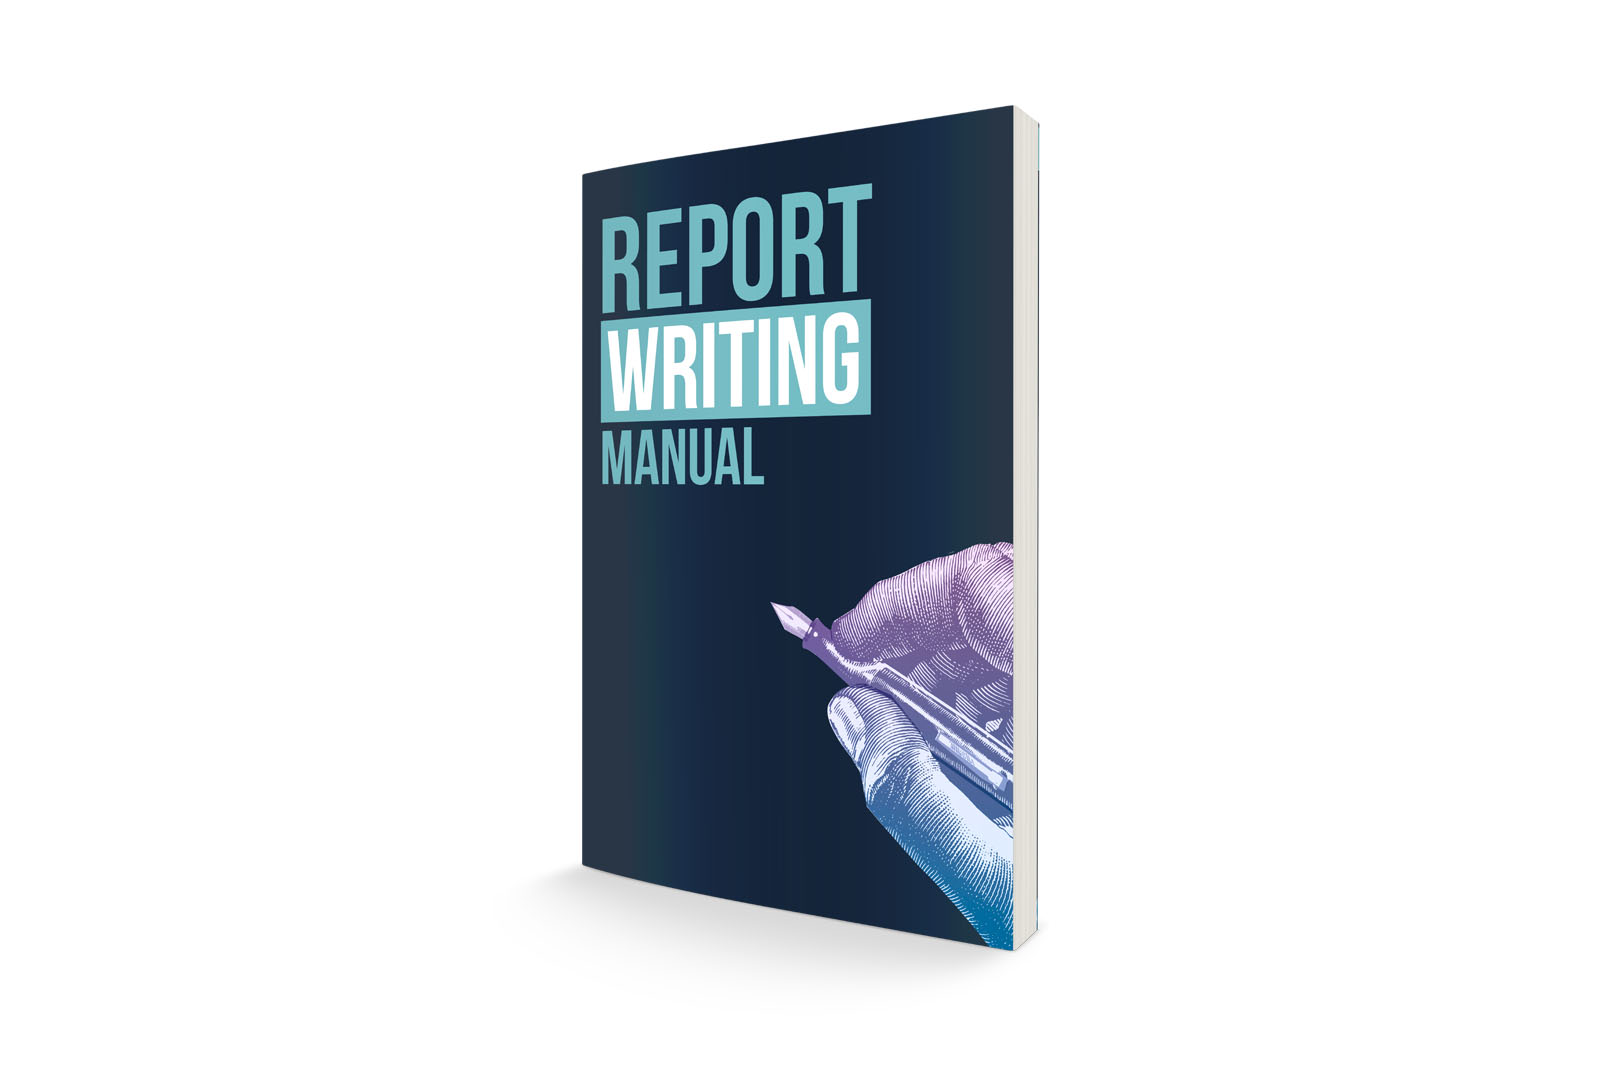 Image of the Report Writing Manual